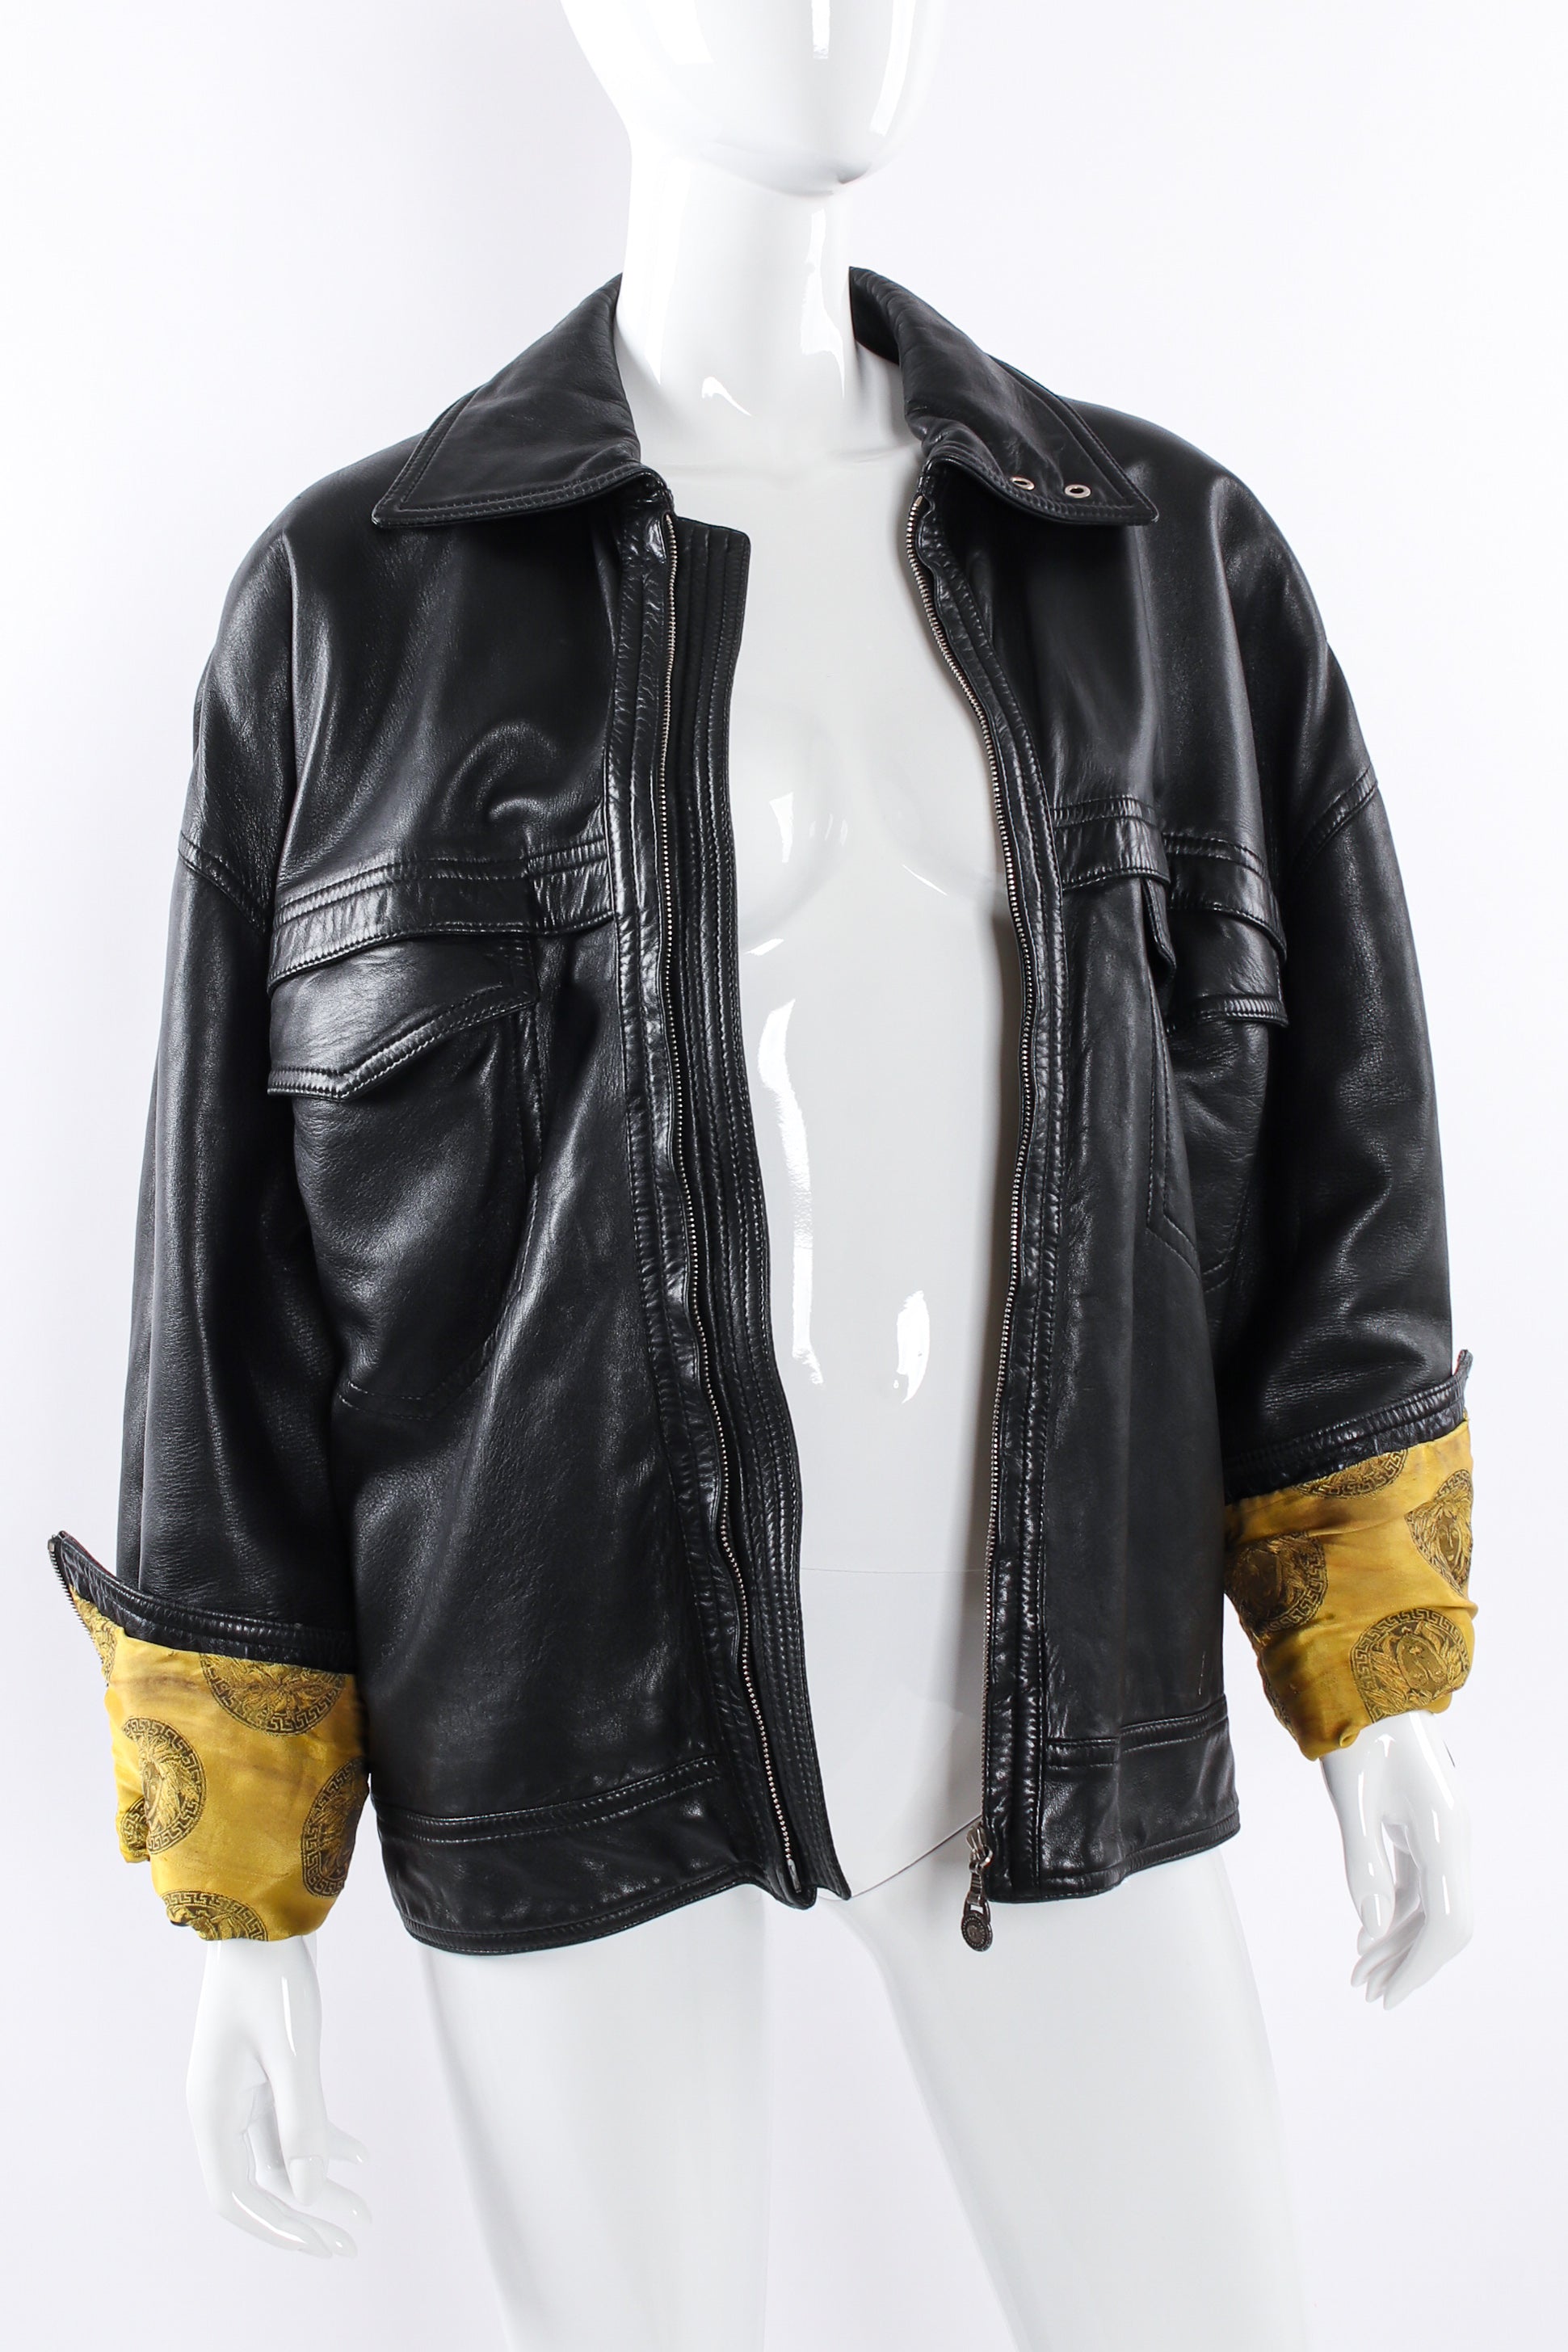 Vintage Gianni Versace Leather Bomber Jacket mannequin sleeves rolled up @ Recess LA